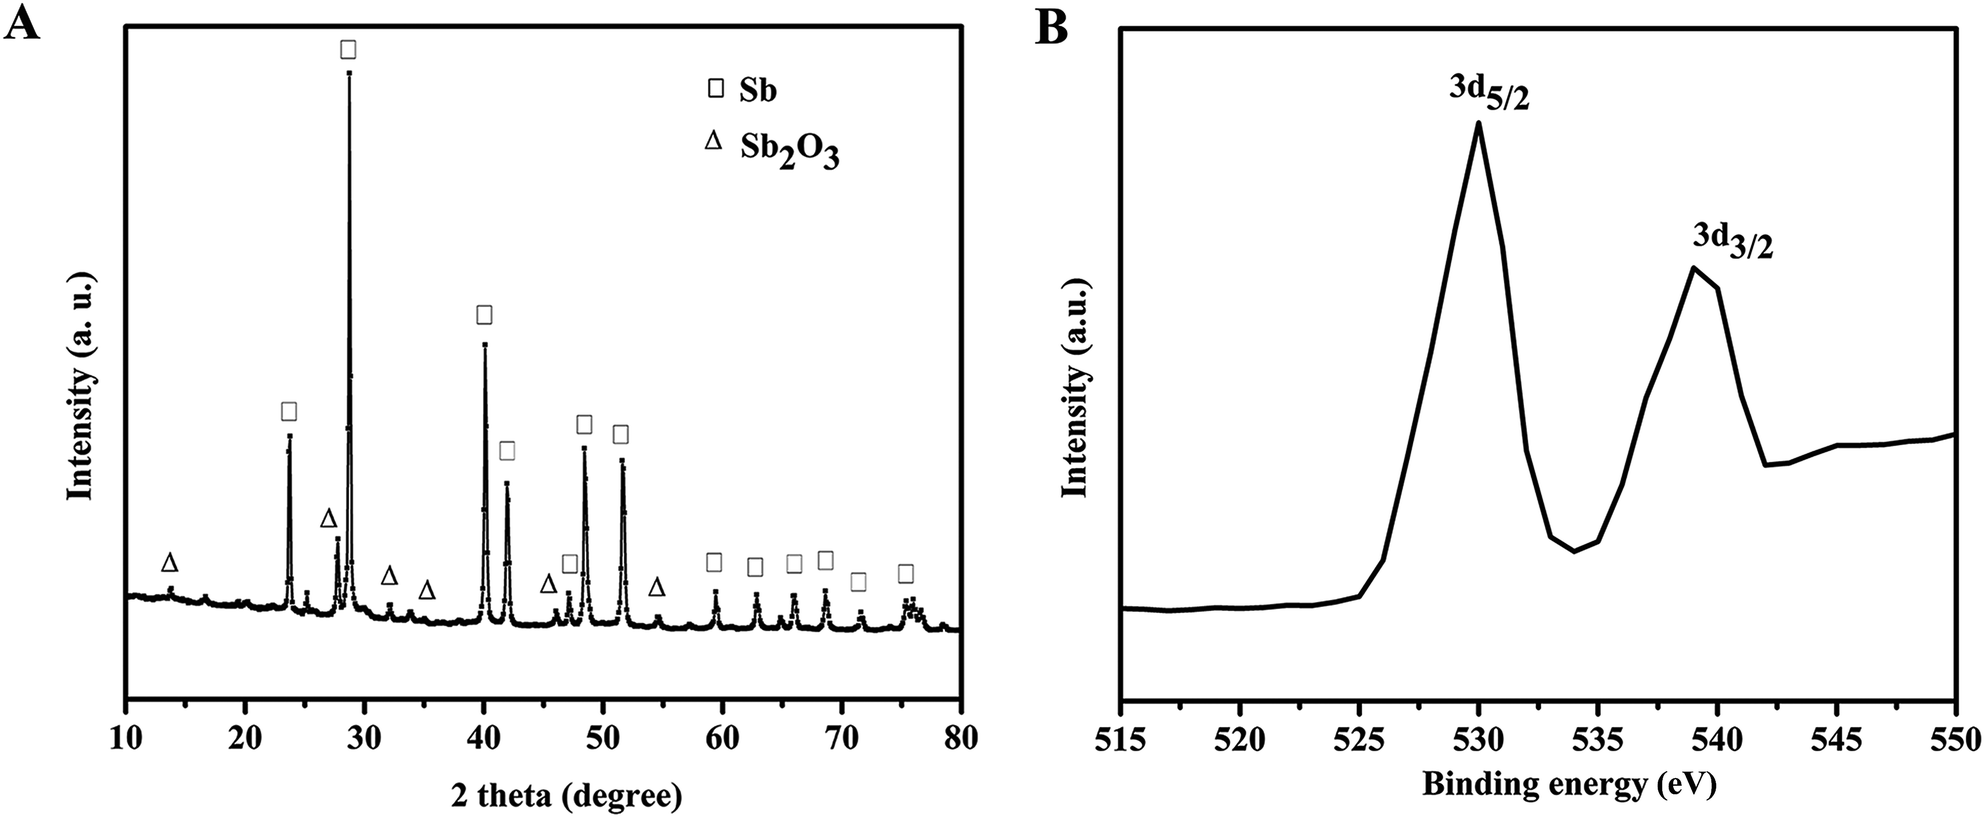 A Solid State Sb Sb 2 O 3 Biosensor For The In Situ Measurement Of Extracellular Acidification Associated With The Multidrug Resistance Phenotype In B Analytical Methods Rsc Publishing Doi 10 1039 C8ayb